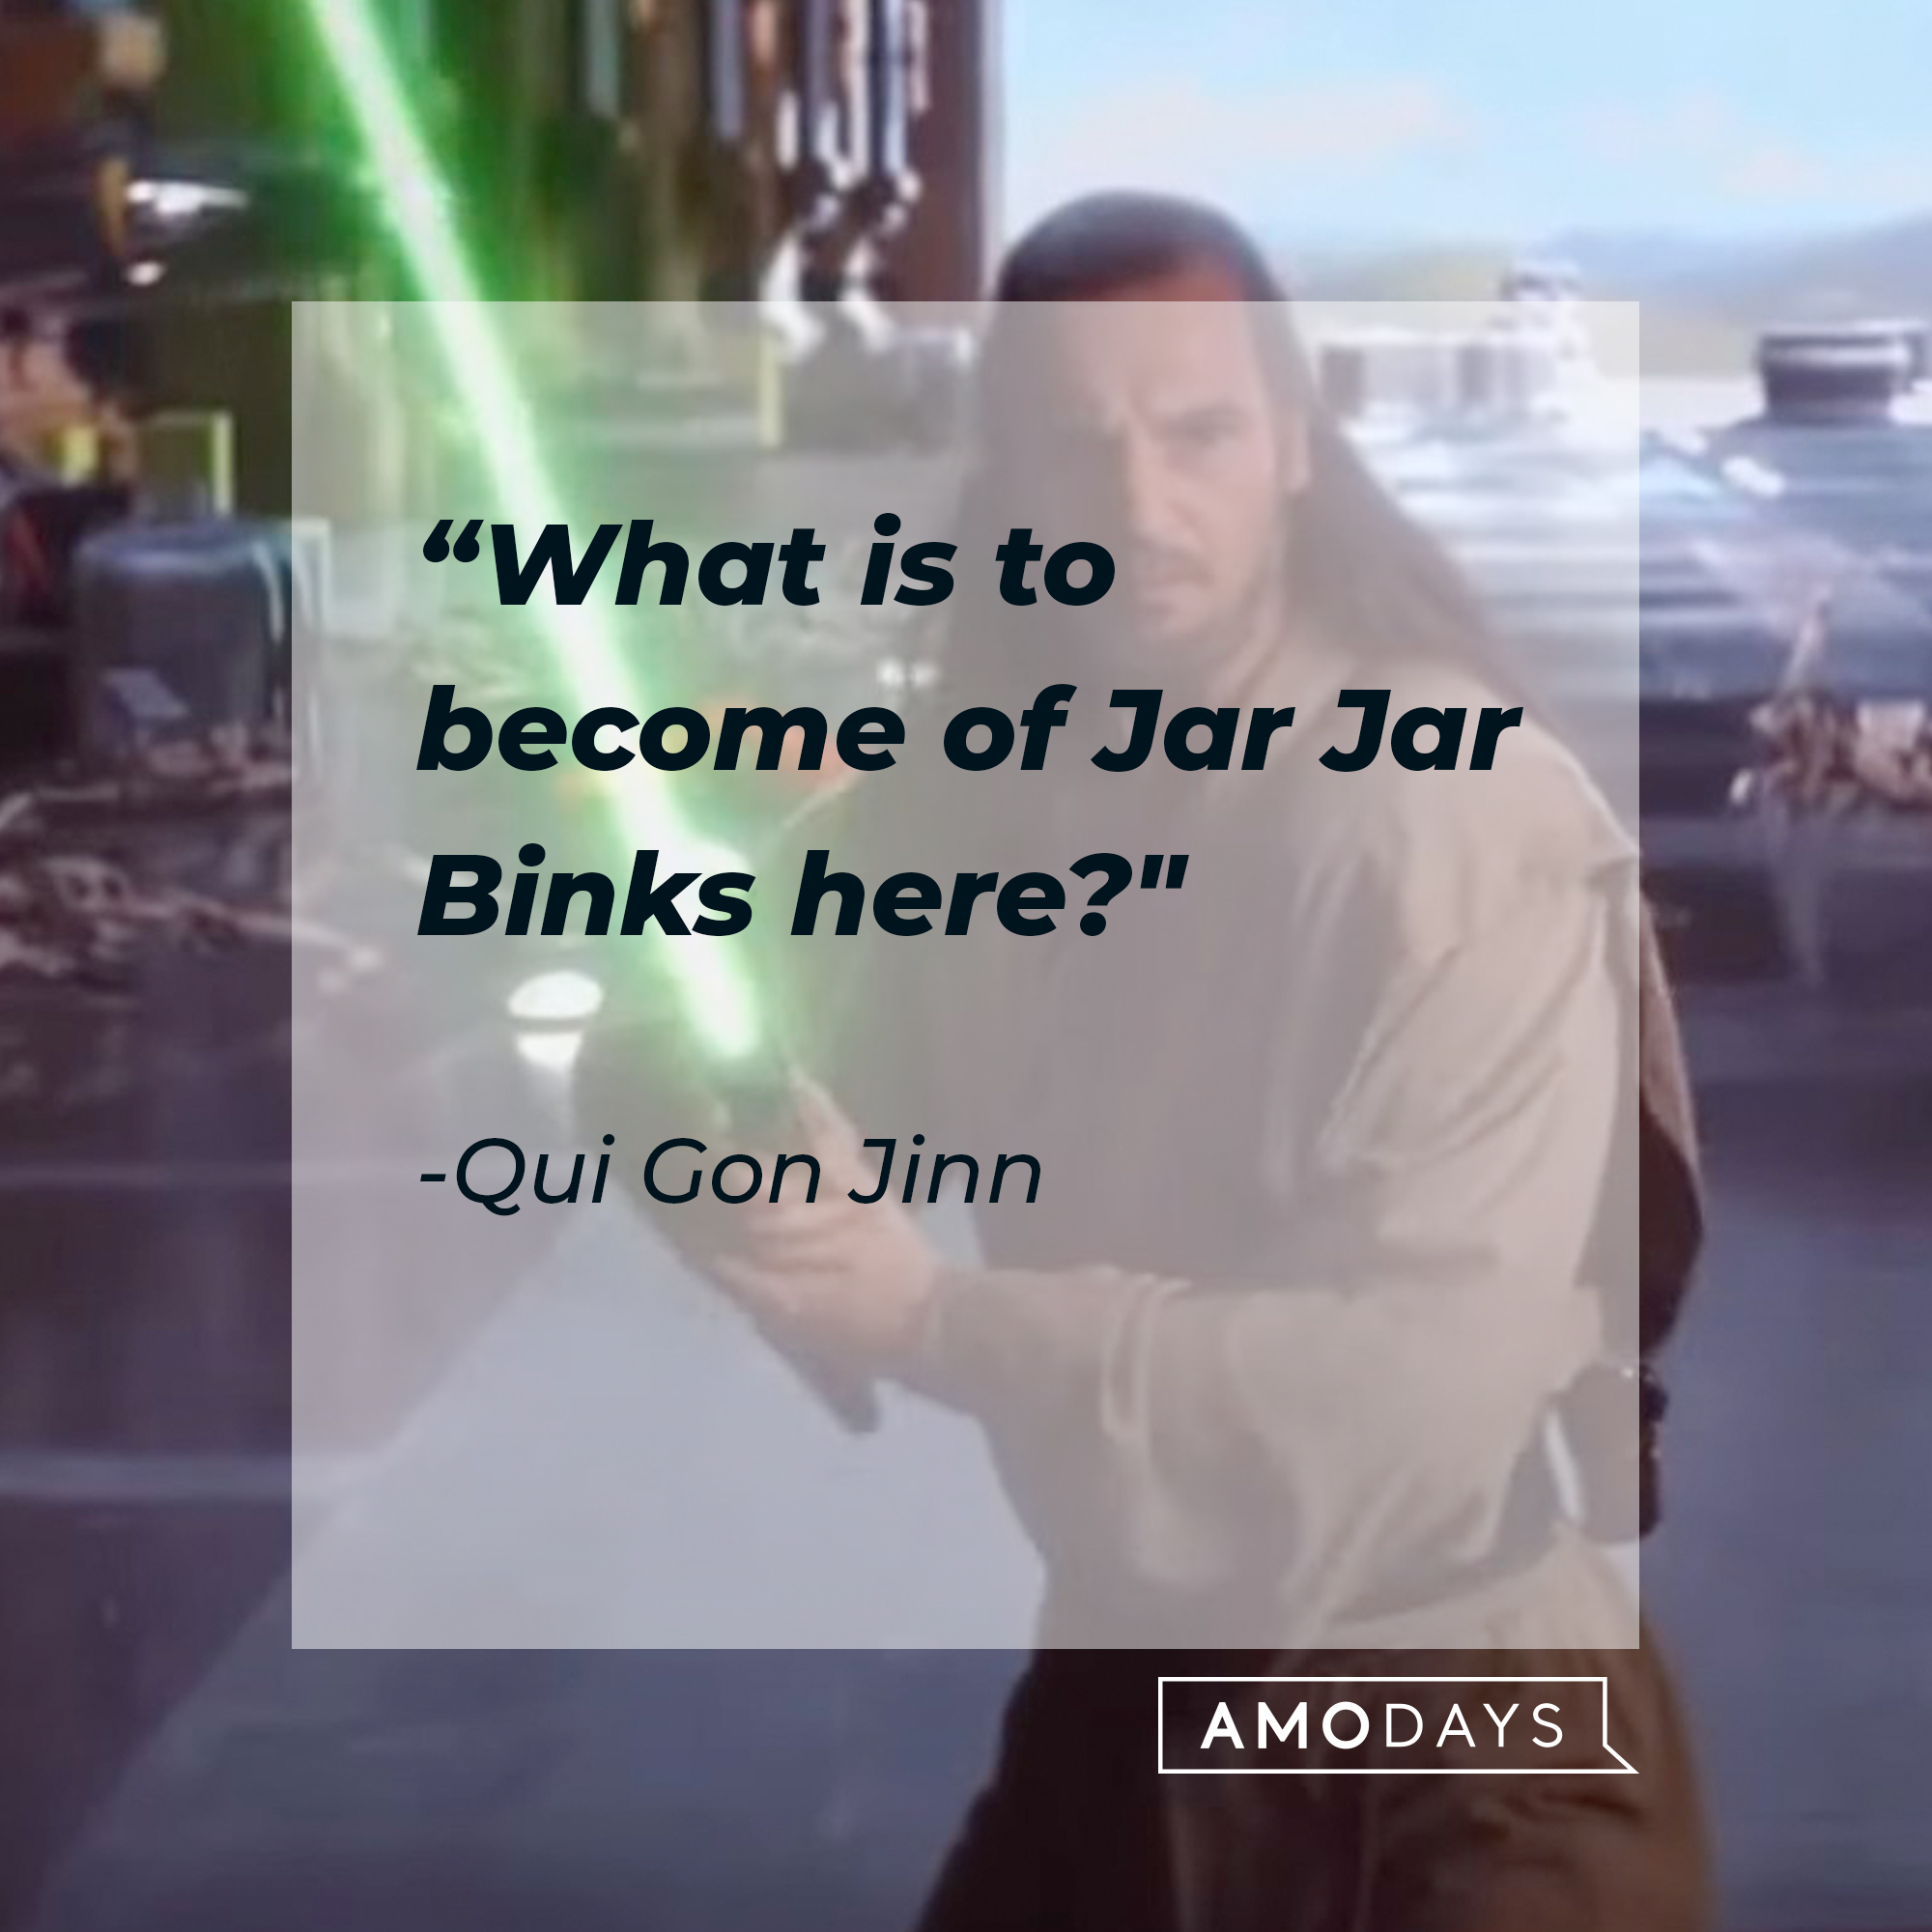 A picture of Qui Gon Jinn with a quote by him: “What is to become of Jar Jar Binks here?" | Source: facebook.com/StarWars